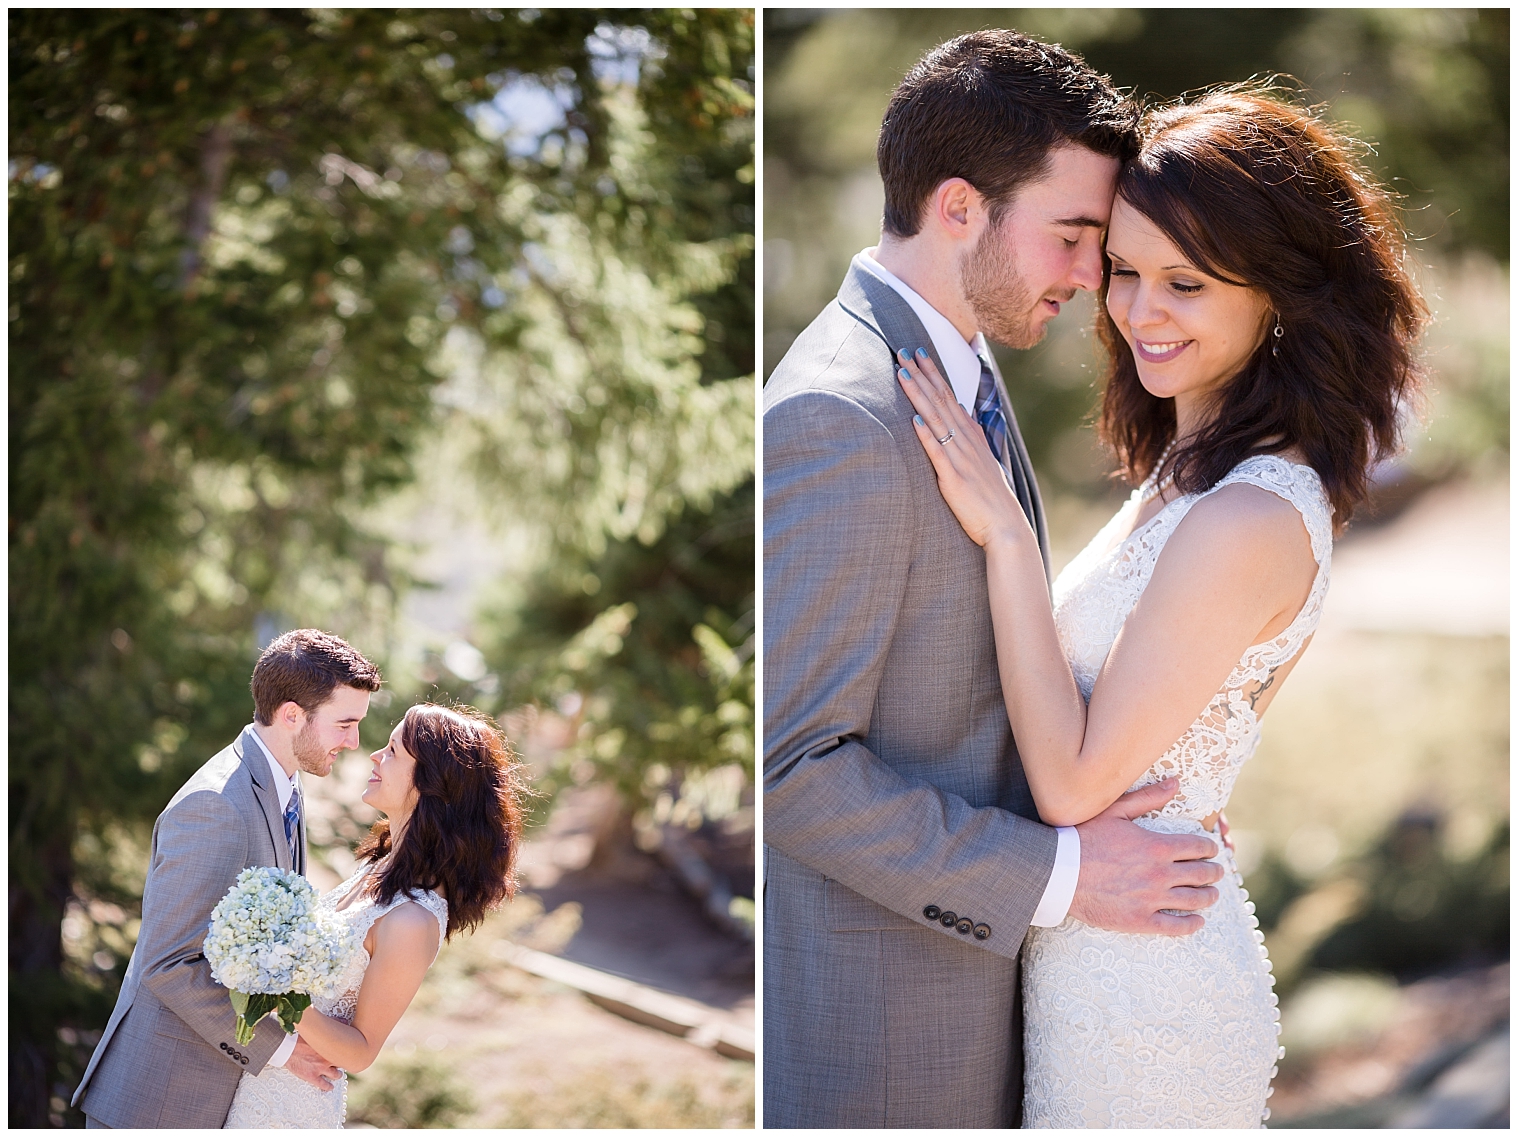 The wedding couple embrace at their Breckenridge elopement.